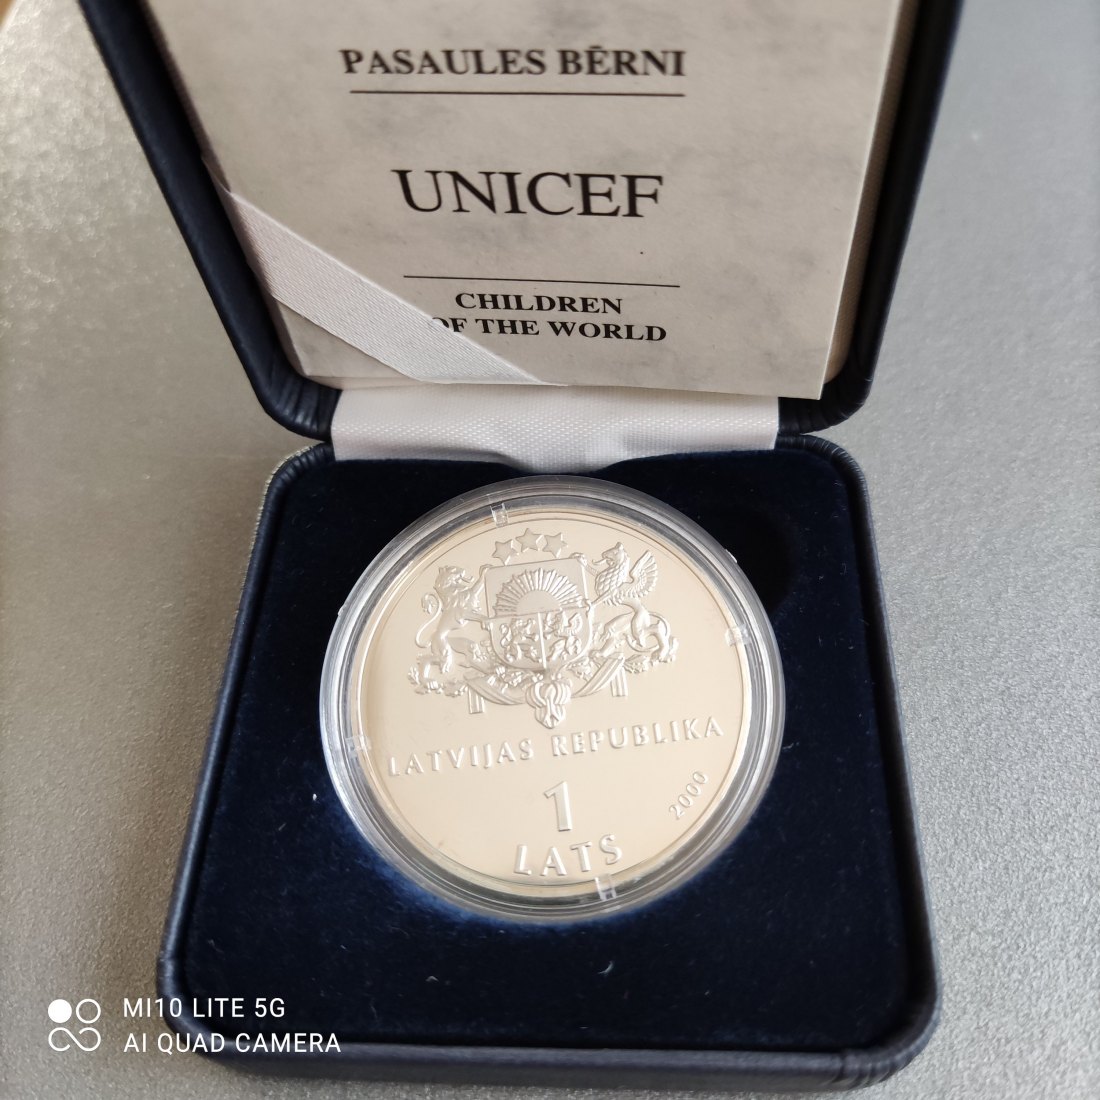  Lettland 1 Lats 2000 Silber proof pp UNICEF Children of the World   